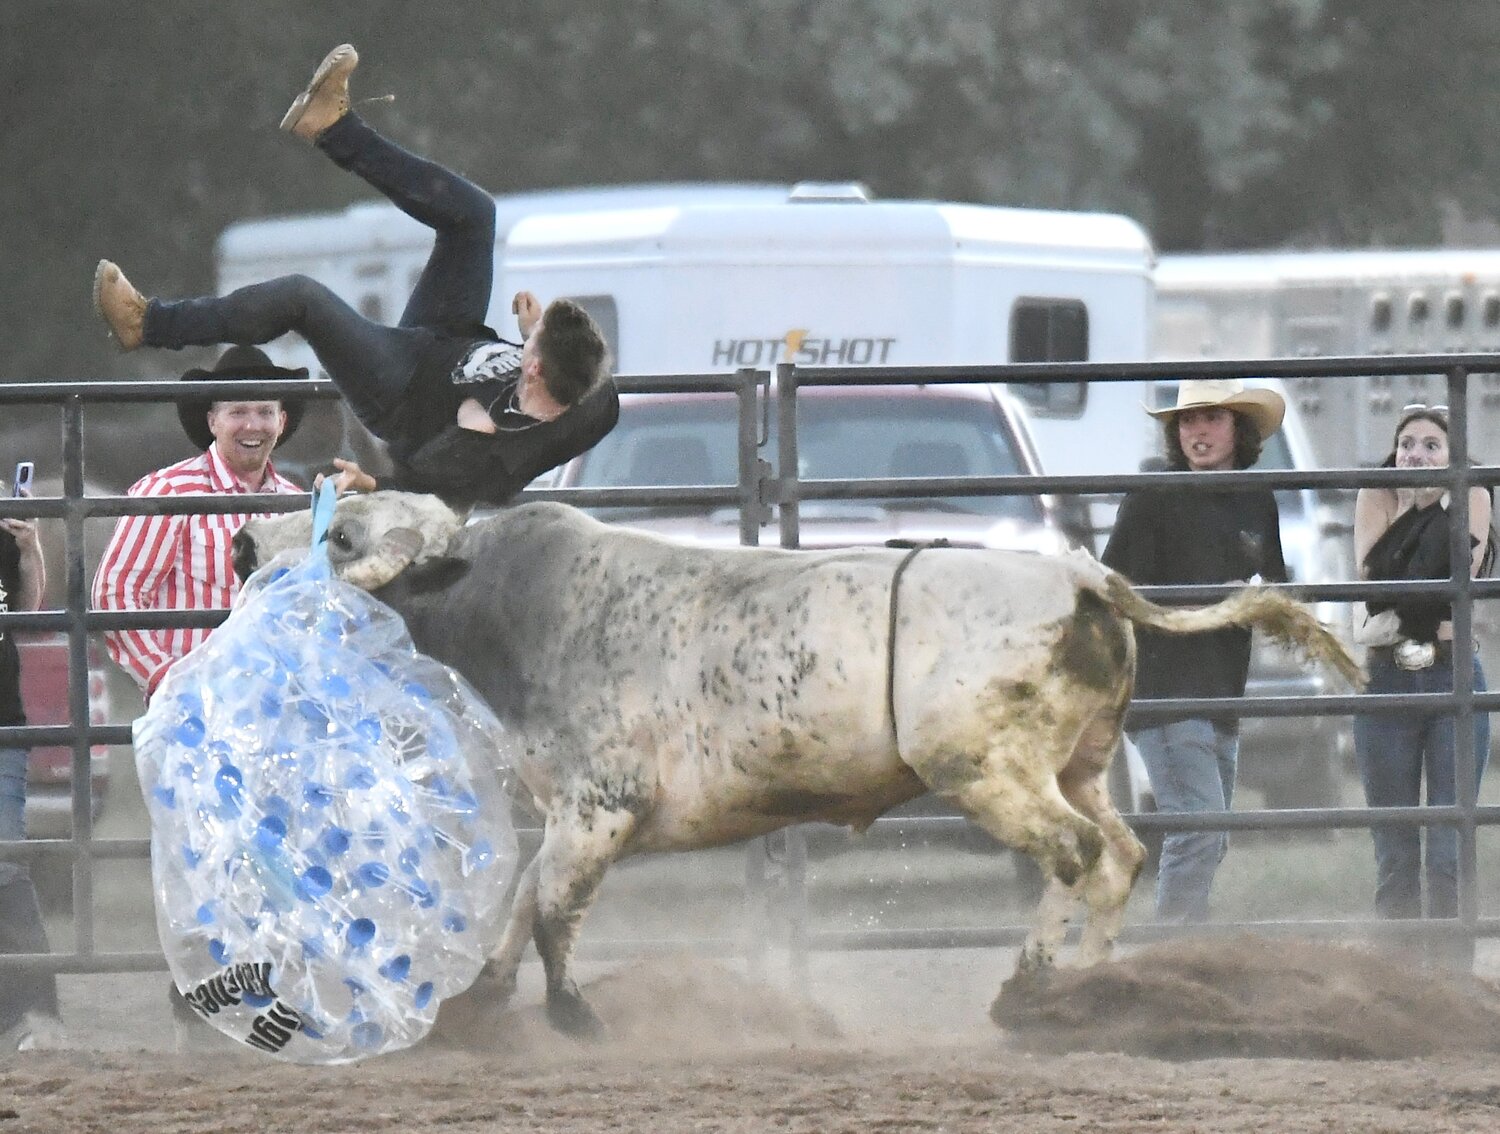 Greg Mitchell — an adrenaline junkie from Lehi, Utah — earned himself a night’s stay at Evanston Regional Hospital Saturday night, after winning the Mexican Fighting Bull Bubble Ball Challenge at the Uinta County Fairgrounds, part of the Evanston Rodeo Series. Mitchell took home the $400 cash prize, but suffered two broken ribs and a punctured lung for his trouble. See story on B1.